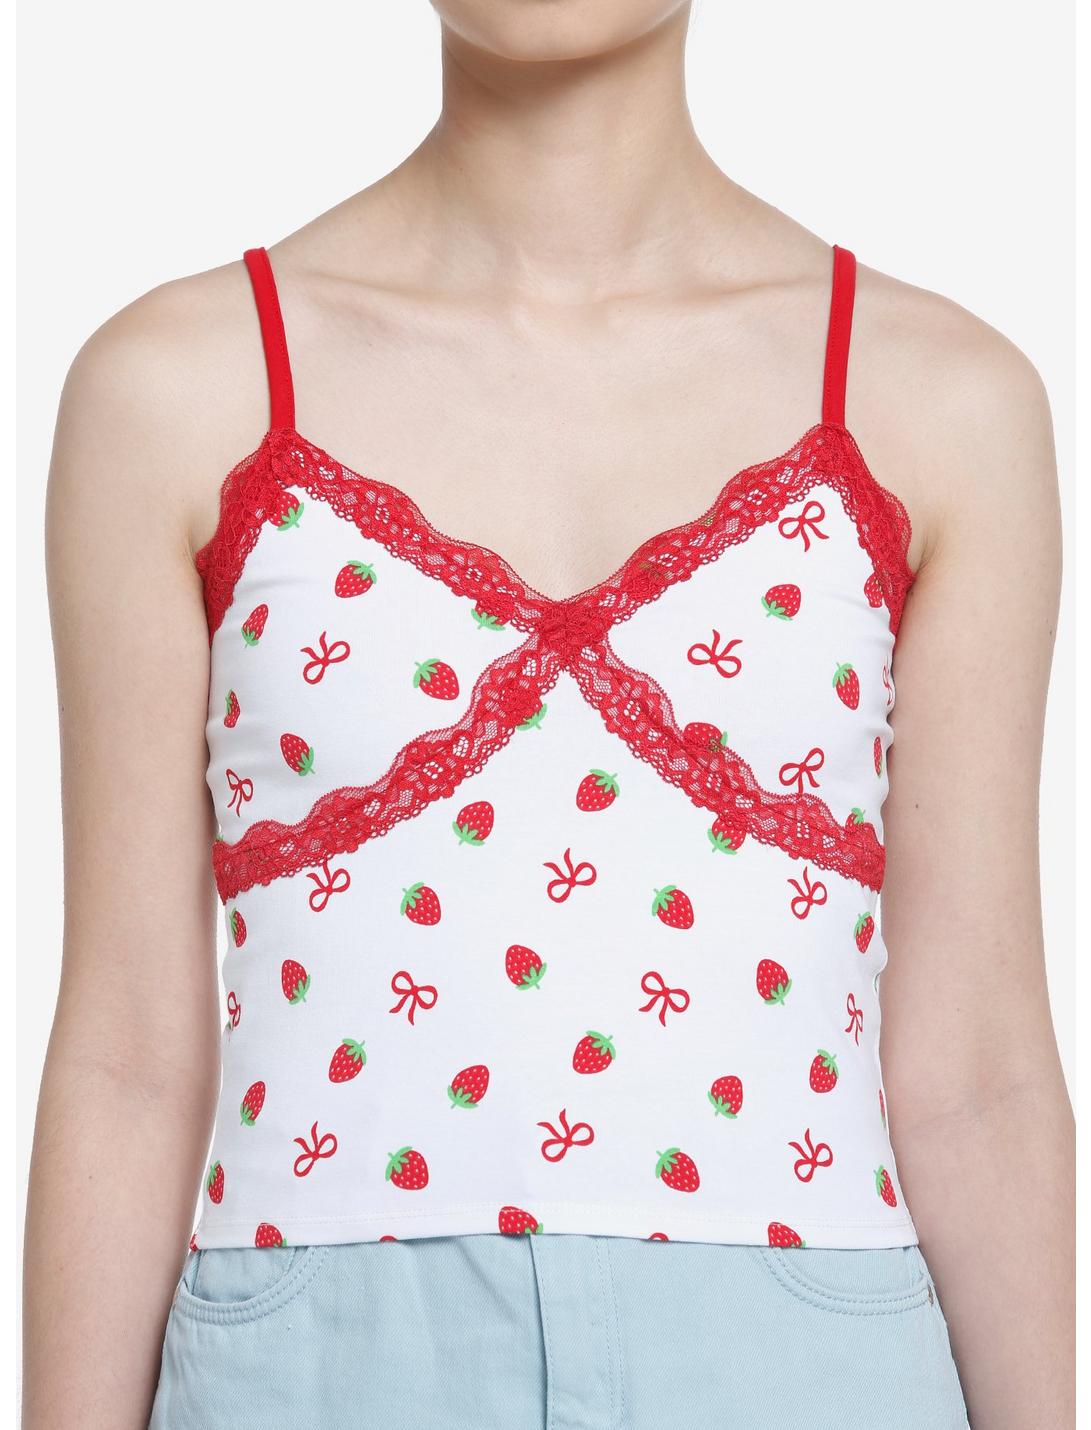 Sweet Society Strawberry Red Lace Girls Crop Tank Top, MULTI, hi-res